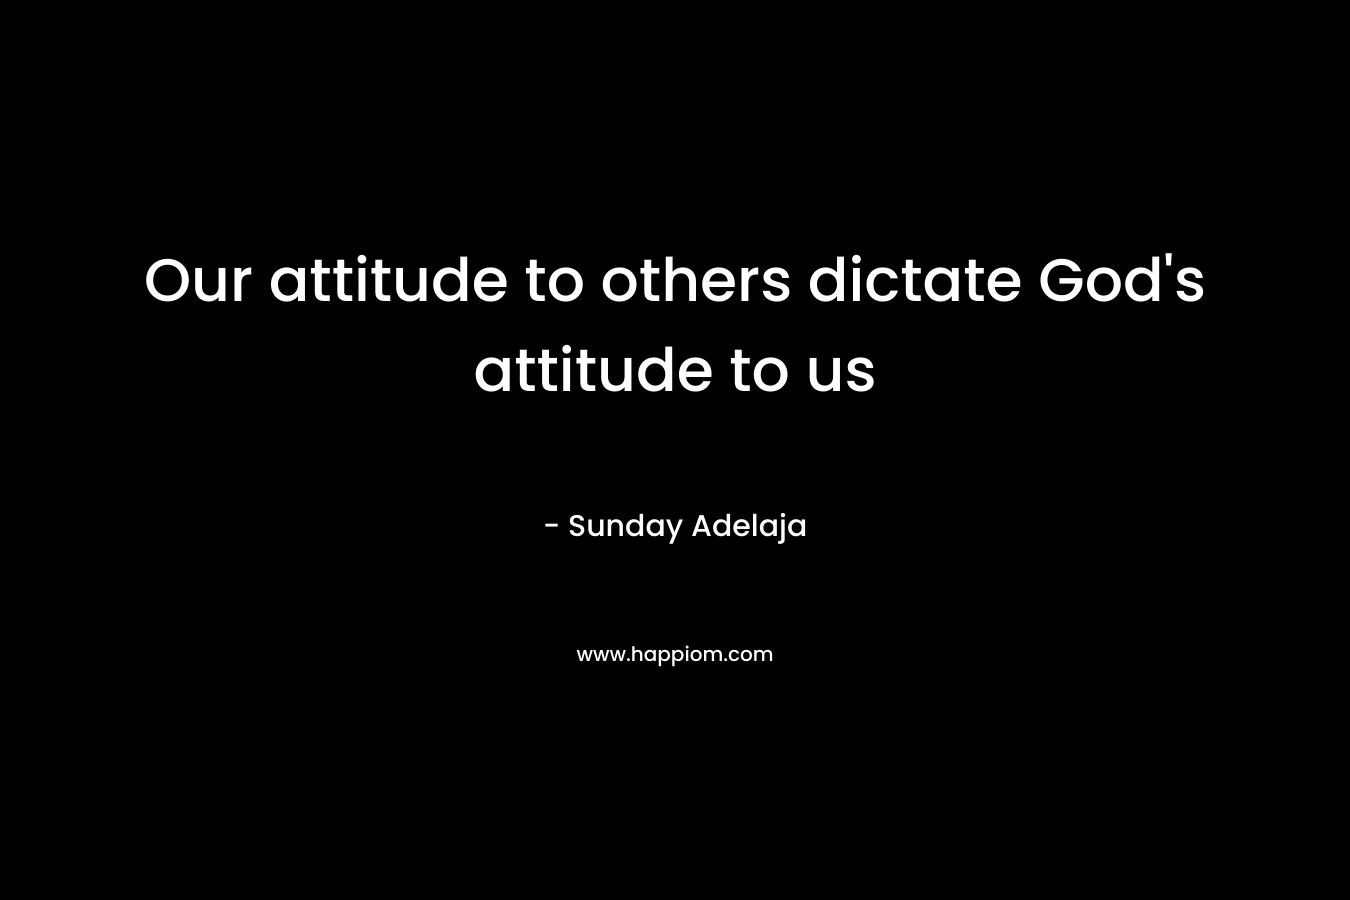 Our attitude to others dictate God's attitude to us